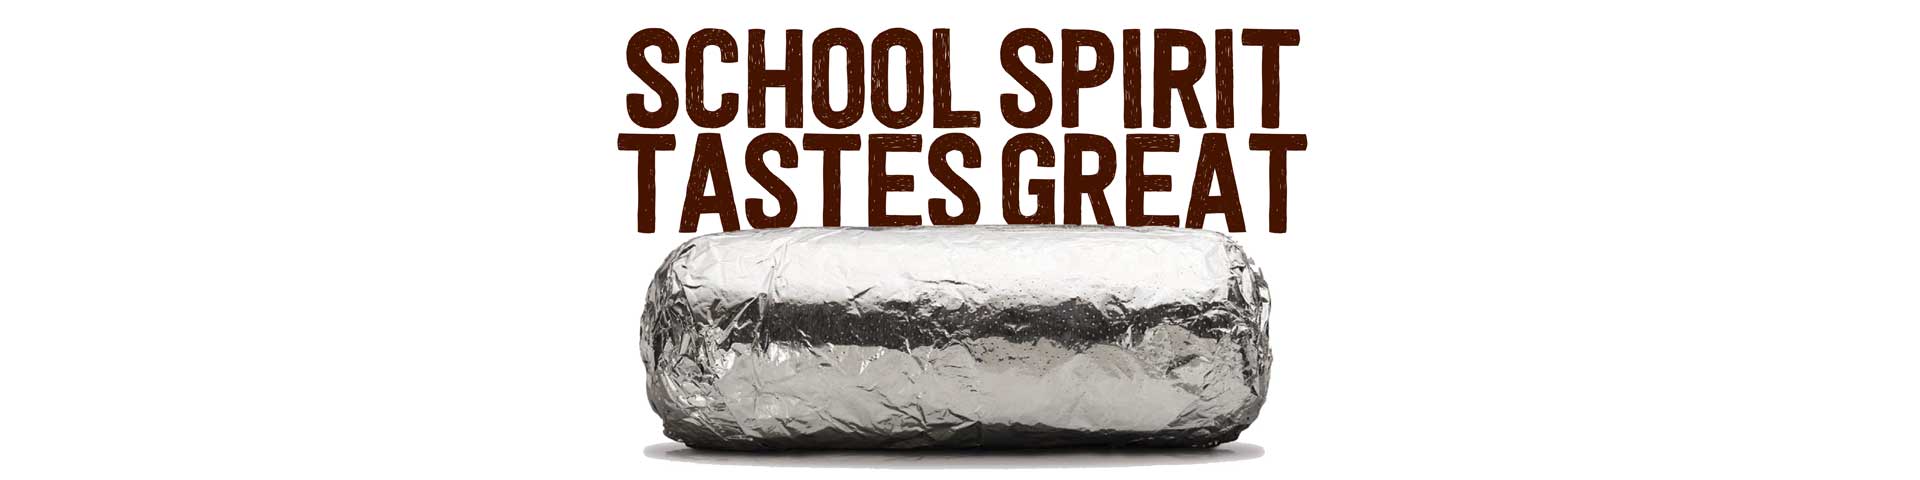 Chipotle fundraising slogan, "School Spirit Tastes Great" over a picture of a wrapped burrito.